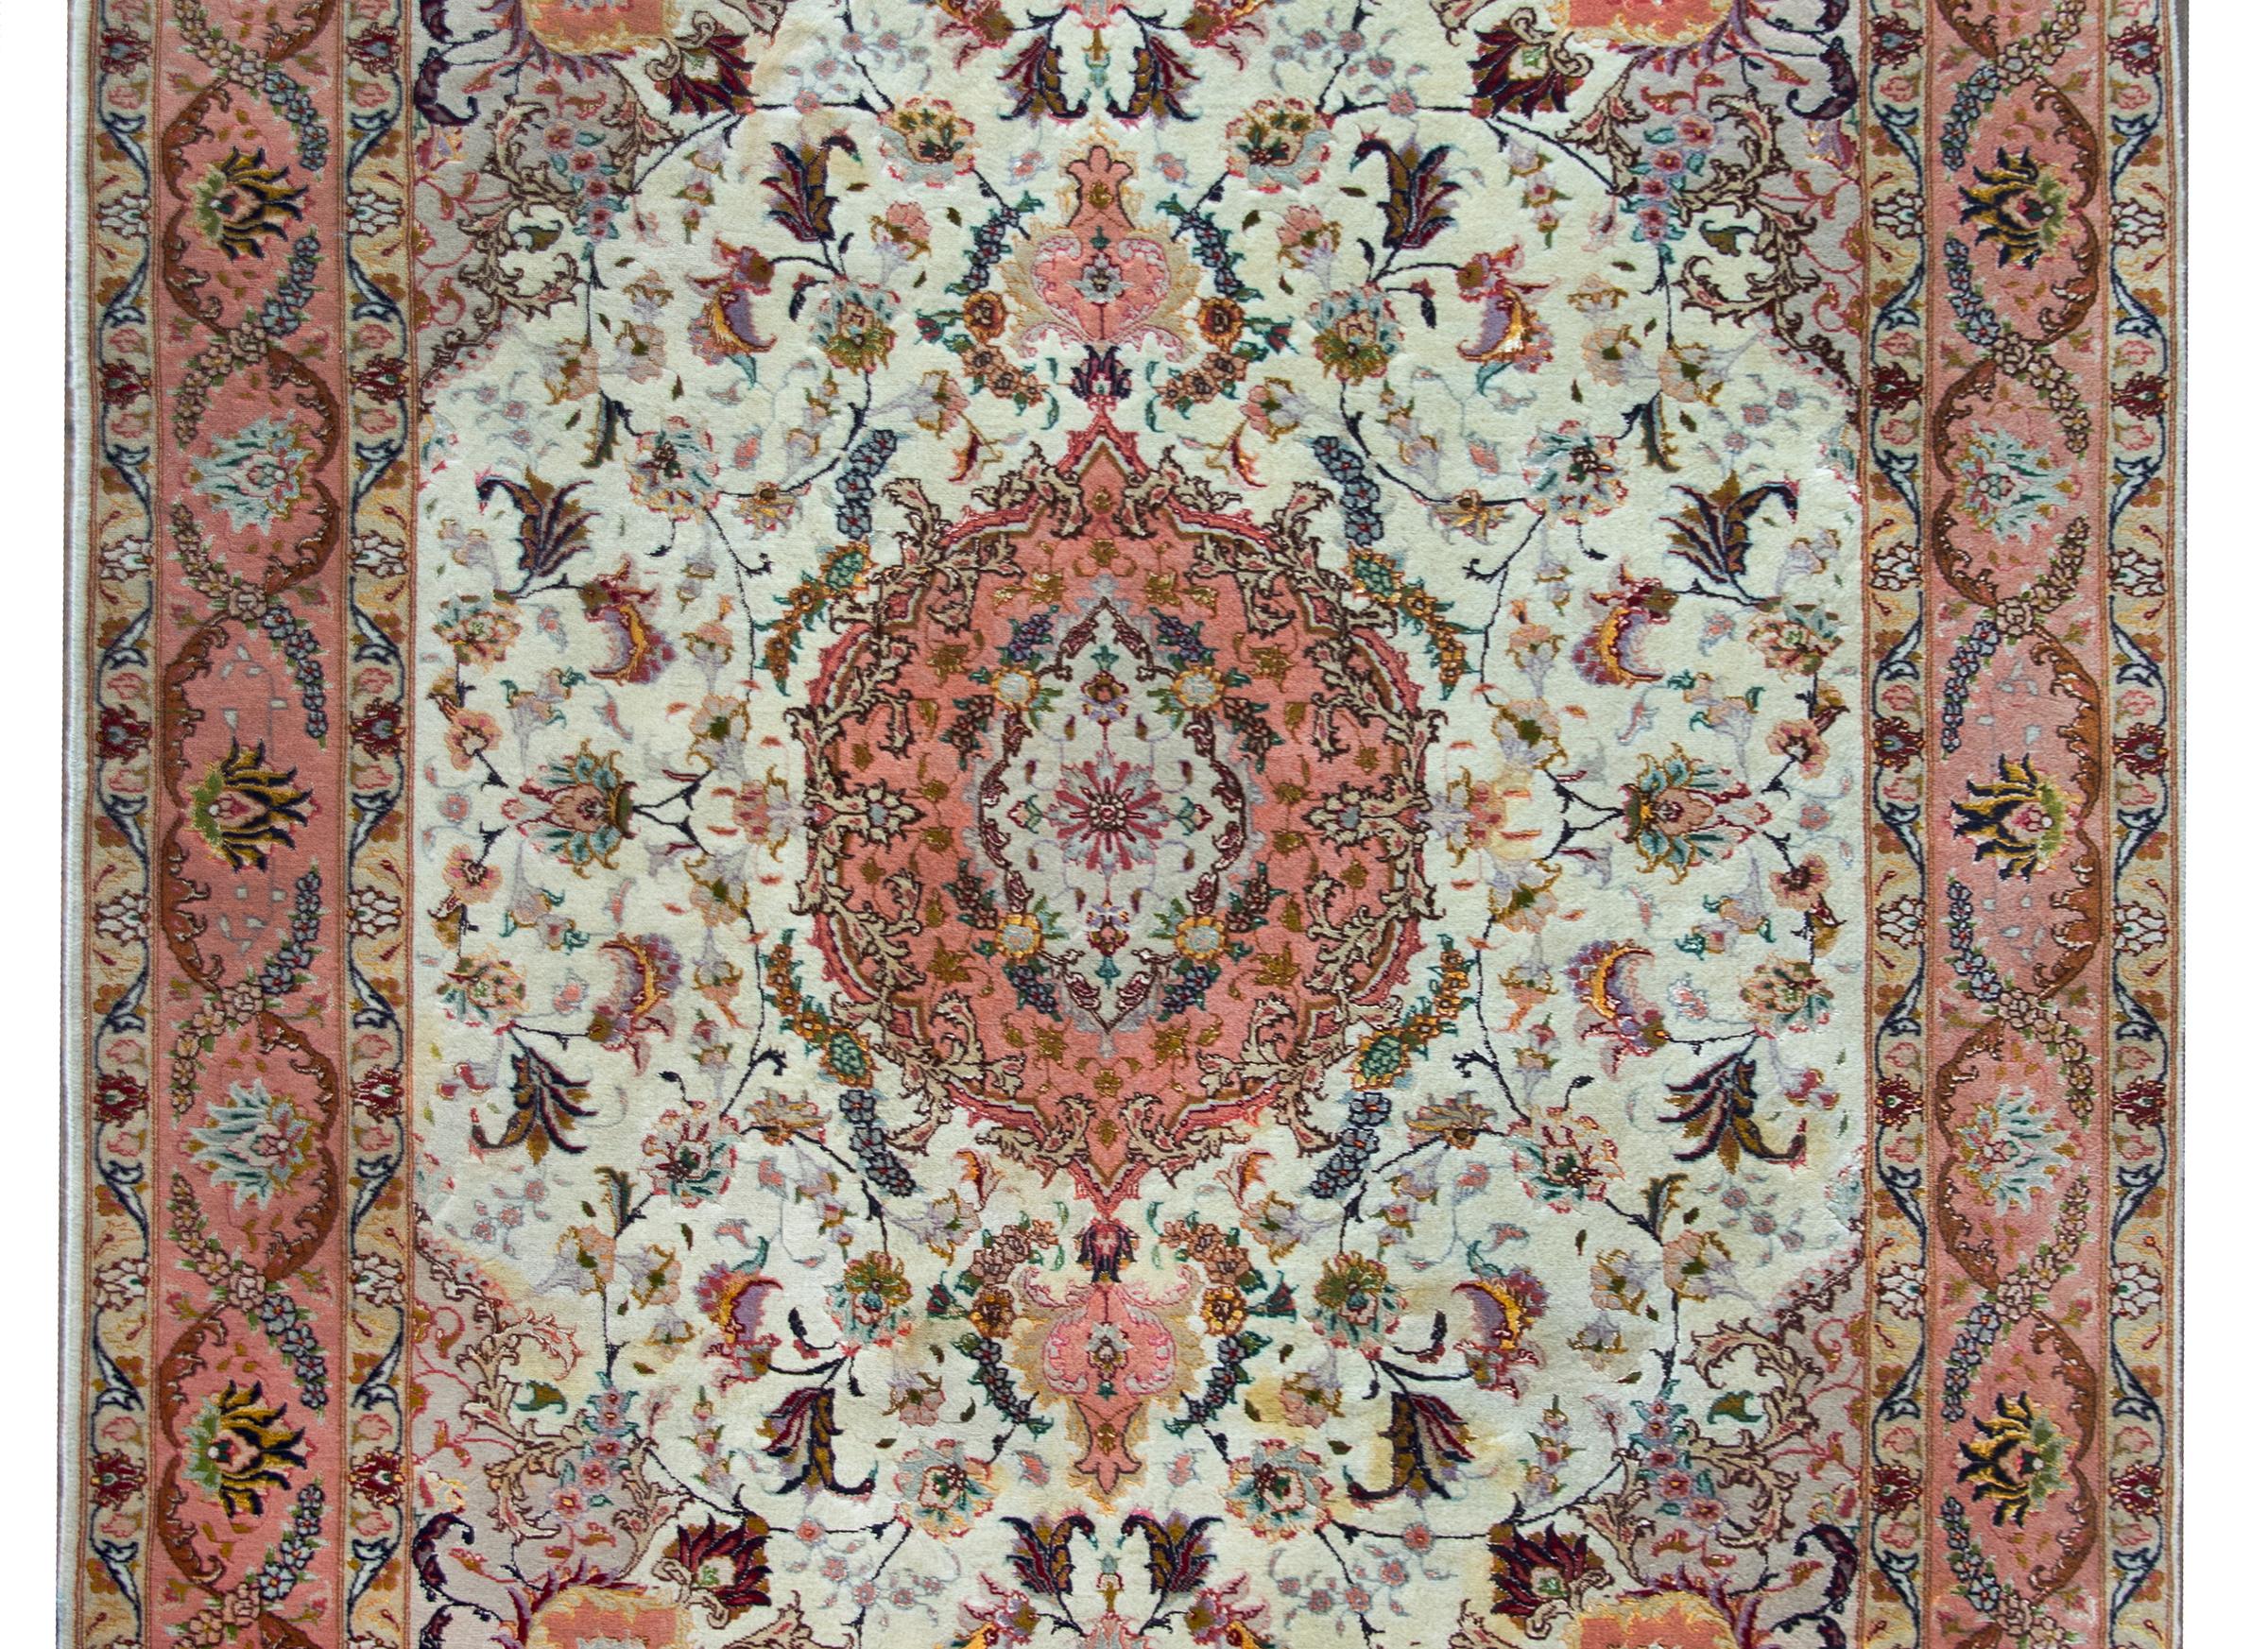 A remarkable 20th century Persian Tabriz rug with a large central floral medallion living amidst a field of even more flowers and vines, and surrounded by a sensational elaborately woven floral patterned border, and all woven in cheerful pinks,